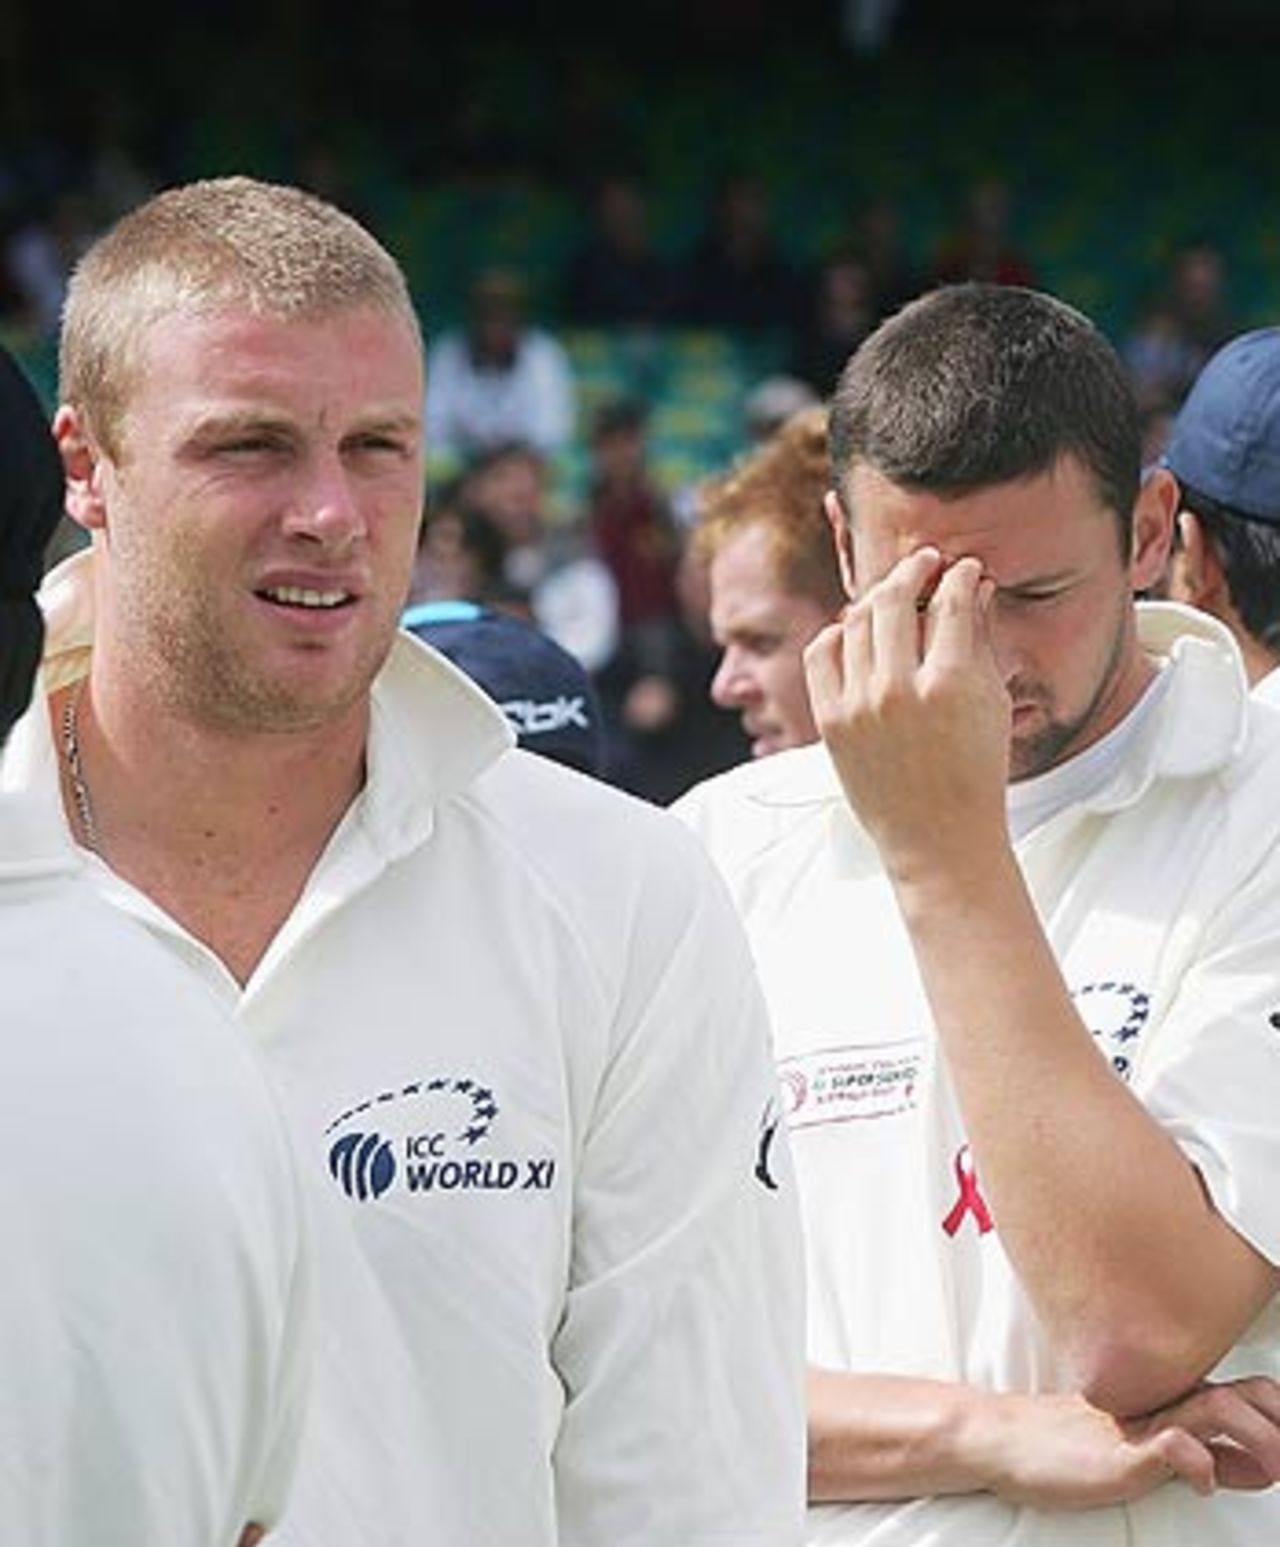 Steve Harmison and Andrew Flintoff are not happy to lose to Australia, Australia v World XI, Super Test, Sydney, 4th Day, October 17, 2005